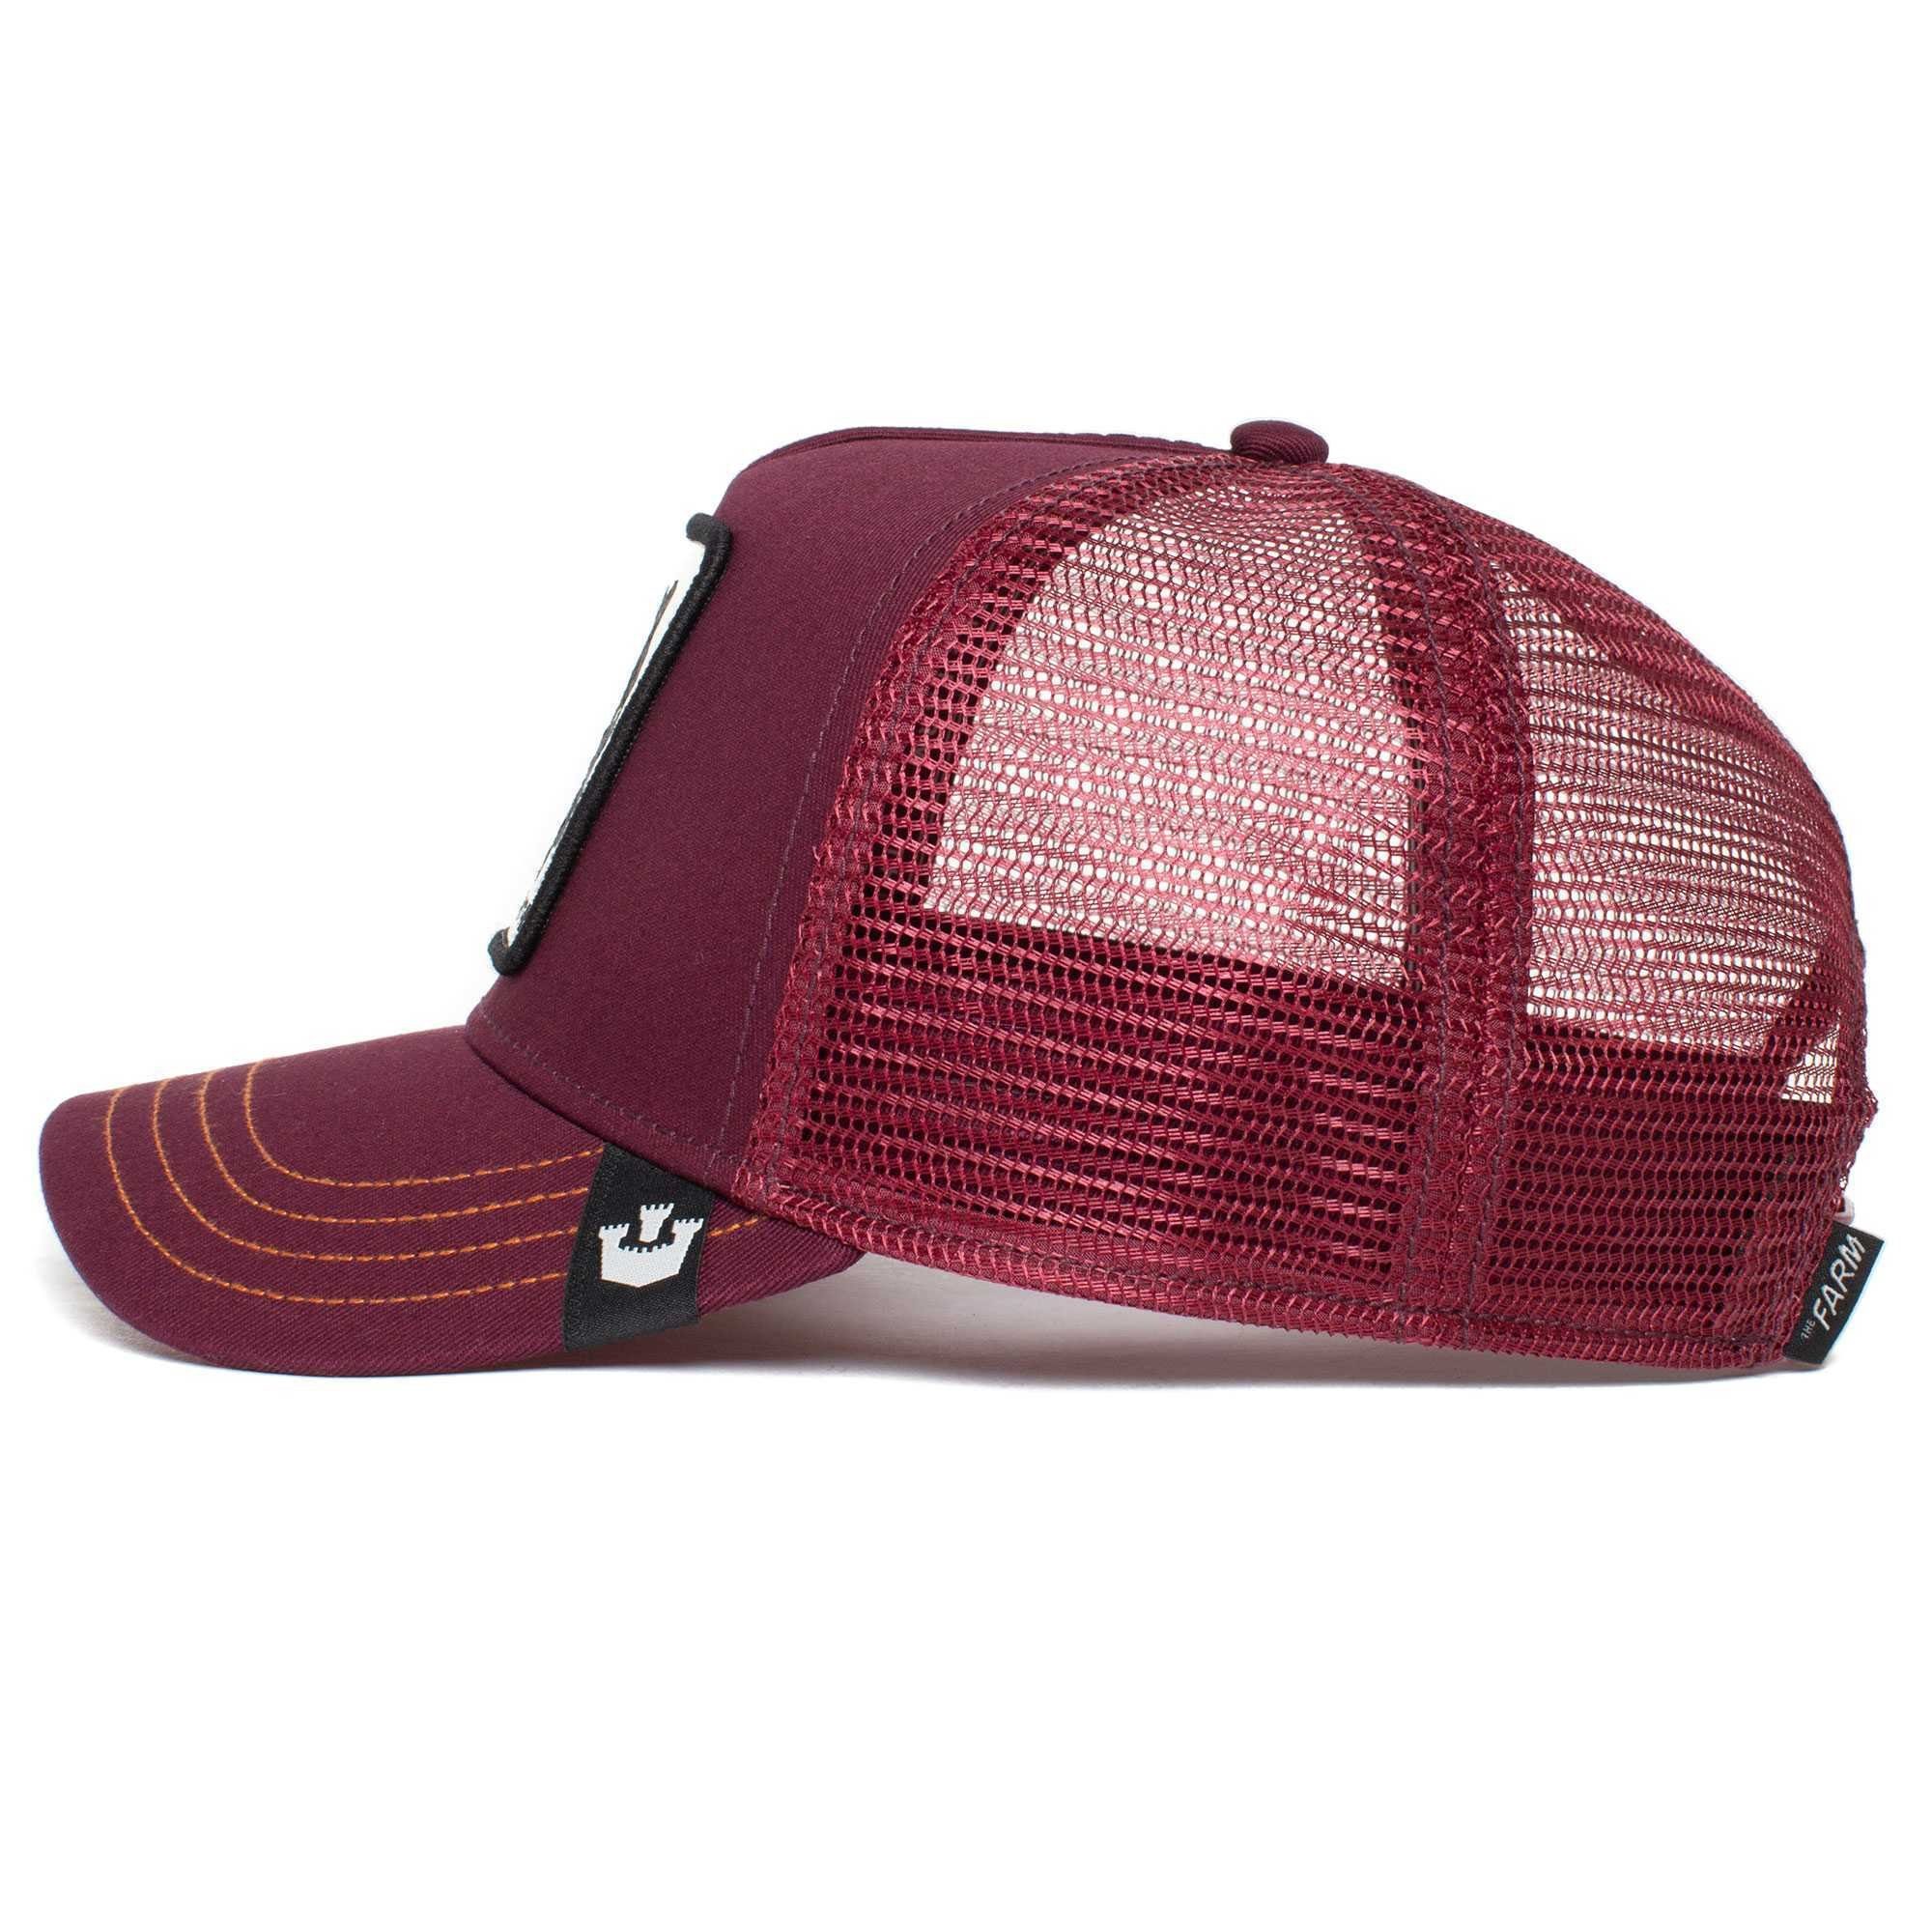 GOORIN Bros. Baseball Trucker Unisex Kappe, One The Panther Cap Cap Frontpatch, - Size maroon